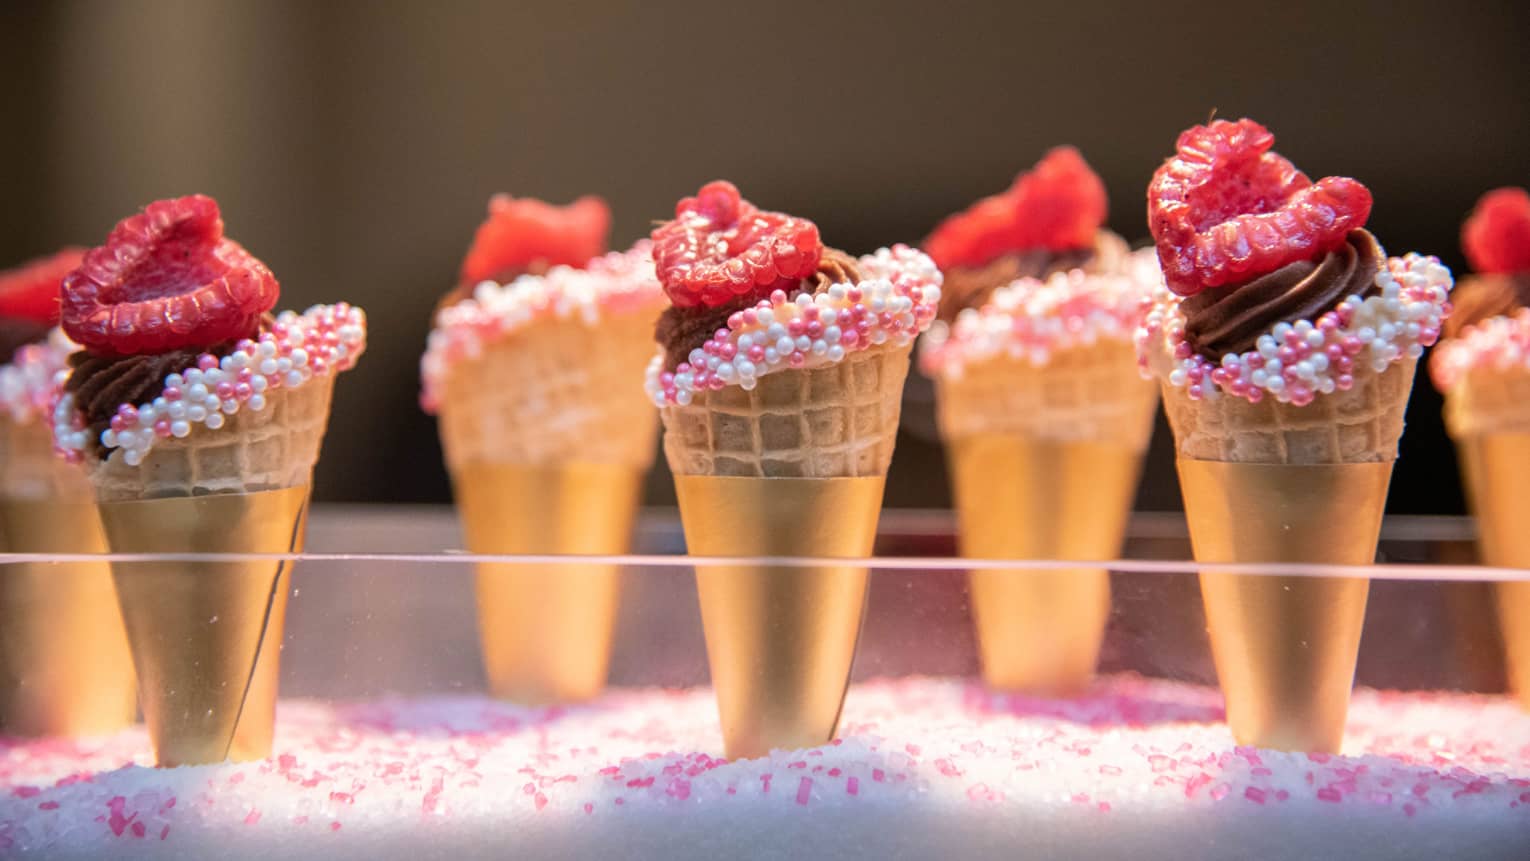 Miniature waffle cone display, with sprinkles and raspberry topping